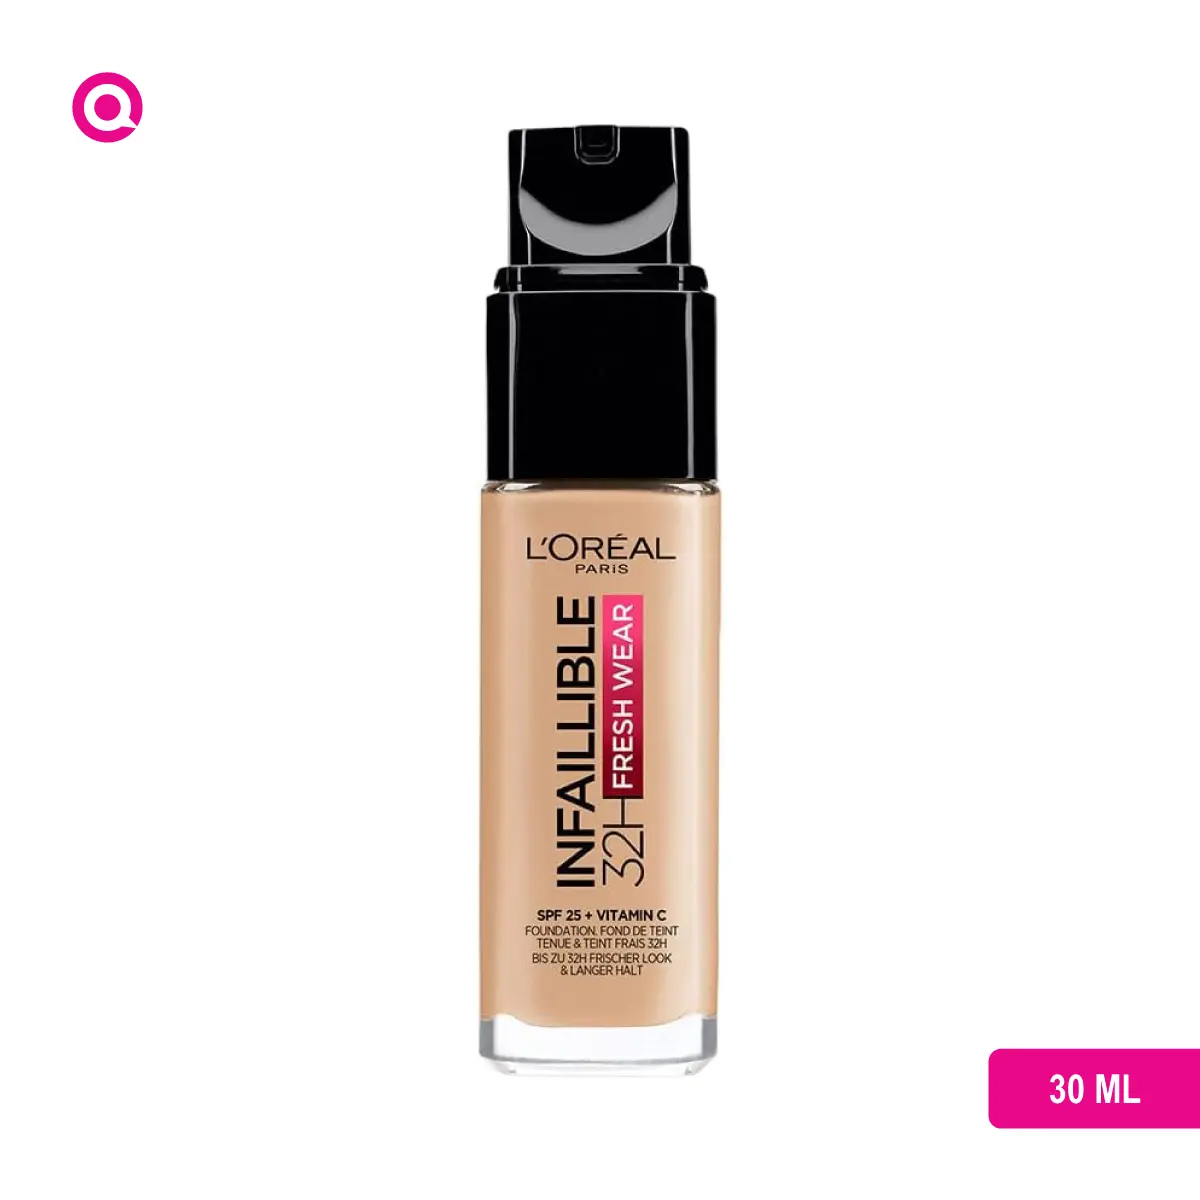 L'Oreal Infaillible 32H Fresh Wear Foundation - 120 GOLDEN VANILLA product image-02